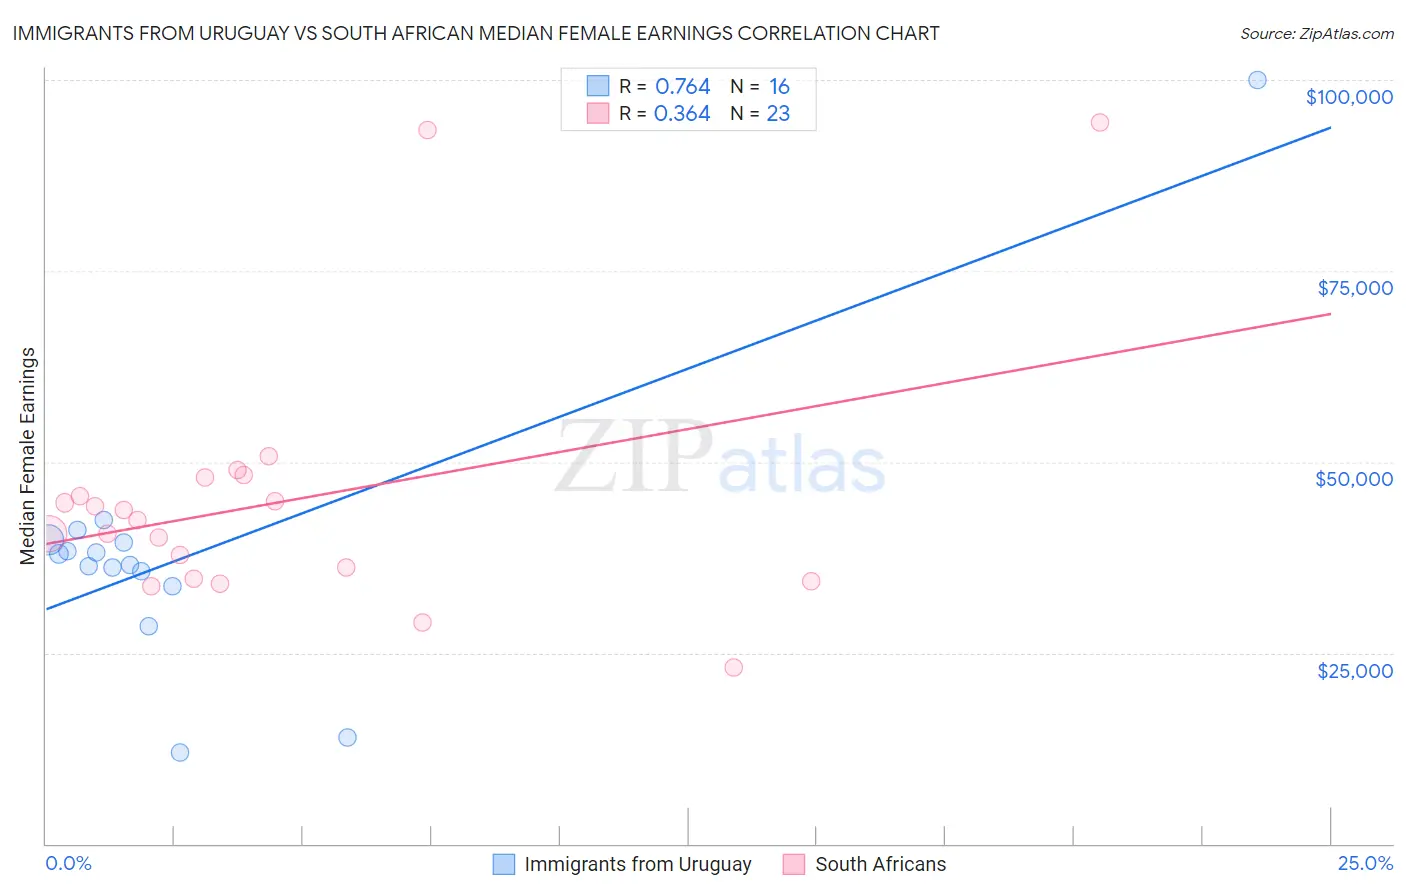 Immigrants from Uruguay vs South African Median Female Earnings